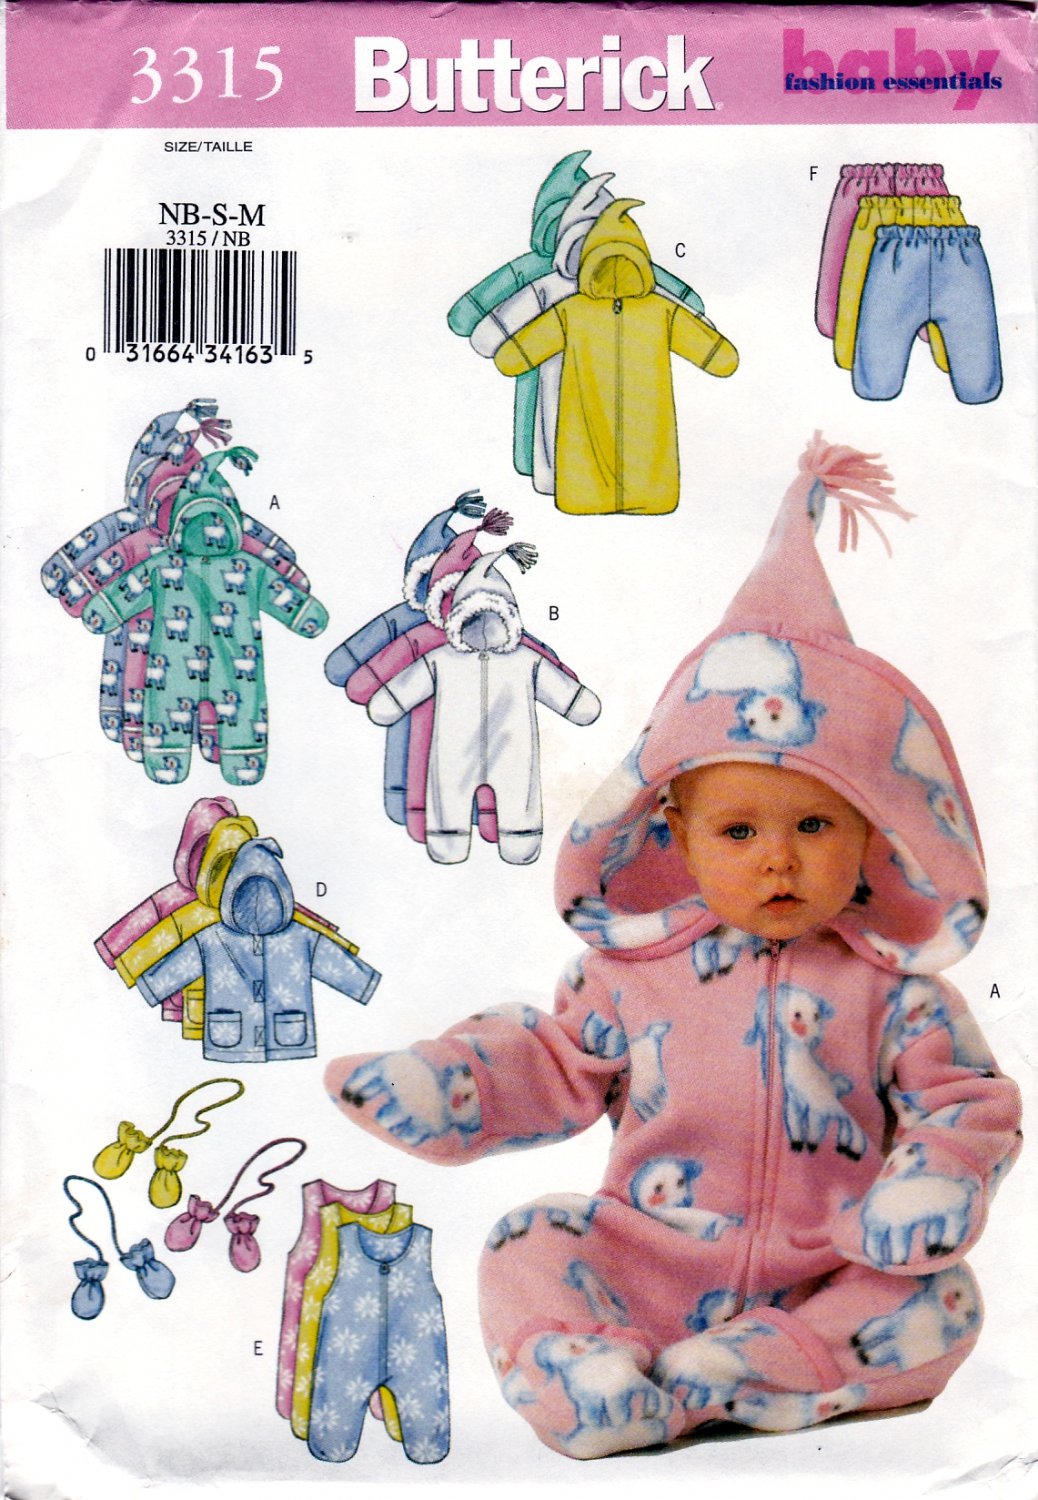 Butterick 3315 Infant Bunting Jacket Jumpsuit Pants Mittens Sewing Pattern Sizes NB-S-M